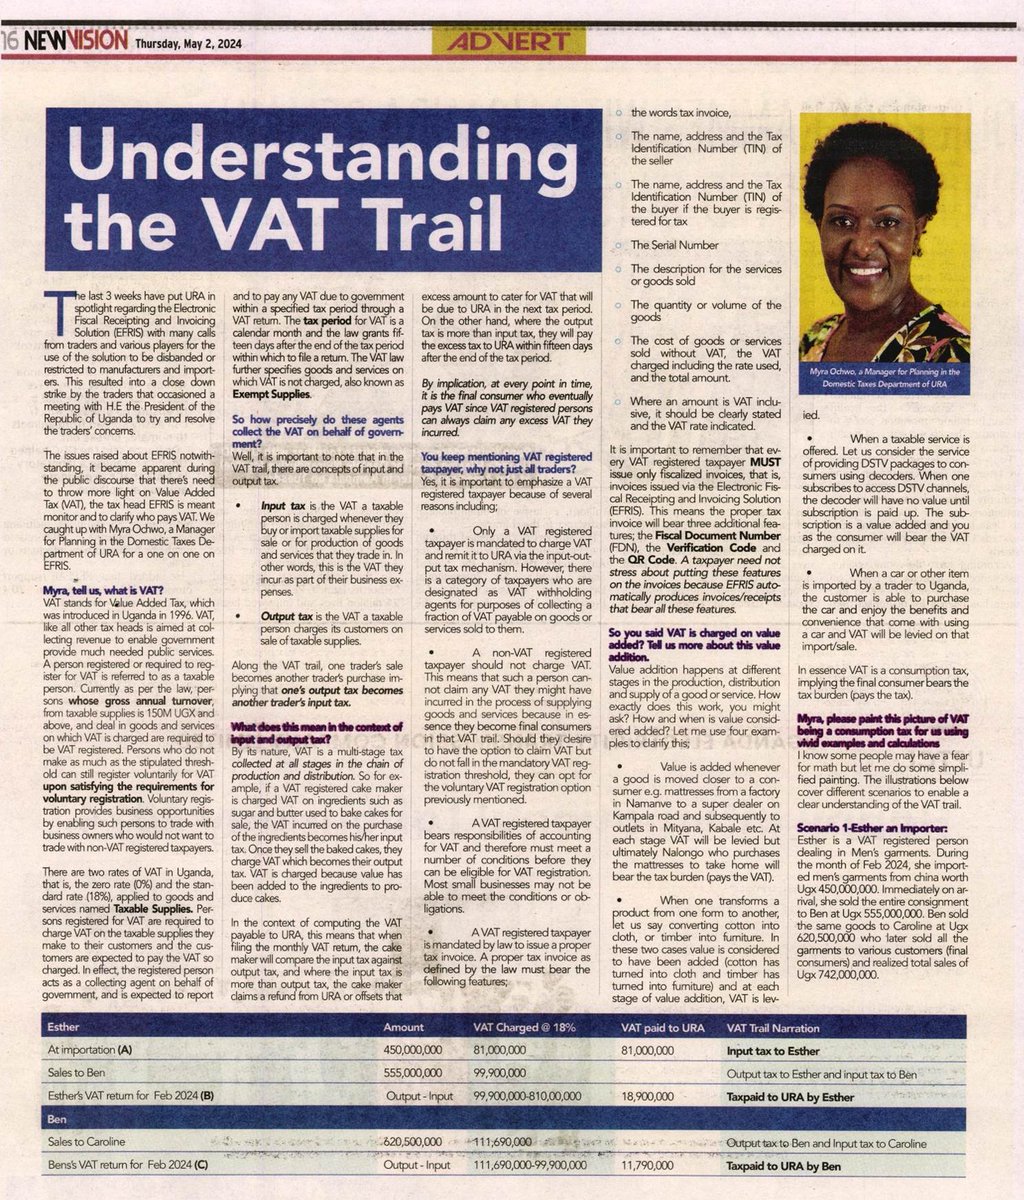 #ICYMI The URA Manager Planning in Domestic Taxes and a Change maverick - Myra Ochwo (@nalongohawt) wrote a piece on understanding the VAT trail. Take a minute and read this insightful article in the @newvisionwire #KakasawithEFRIS #FfeBanno